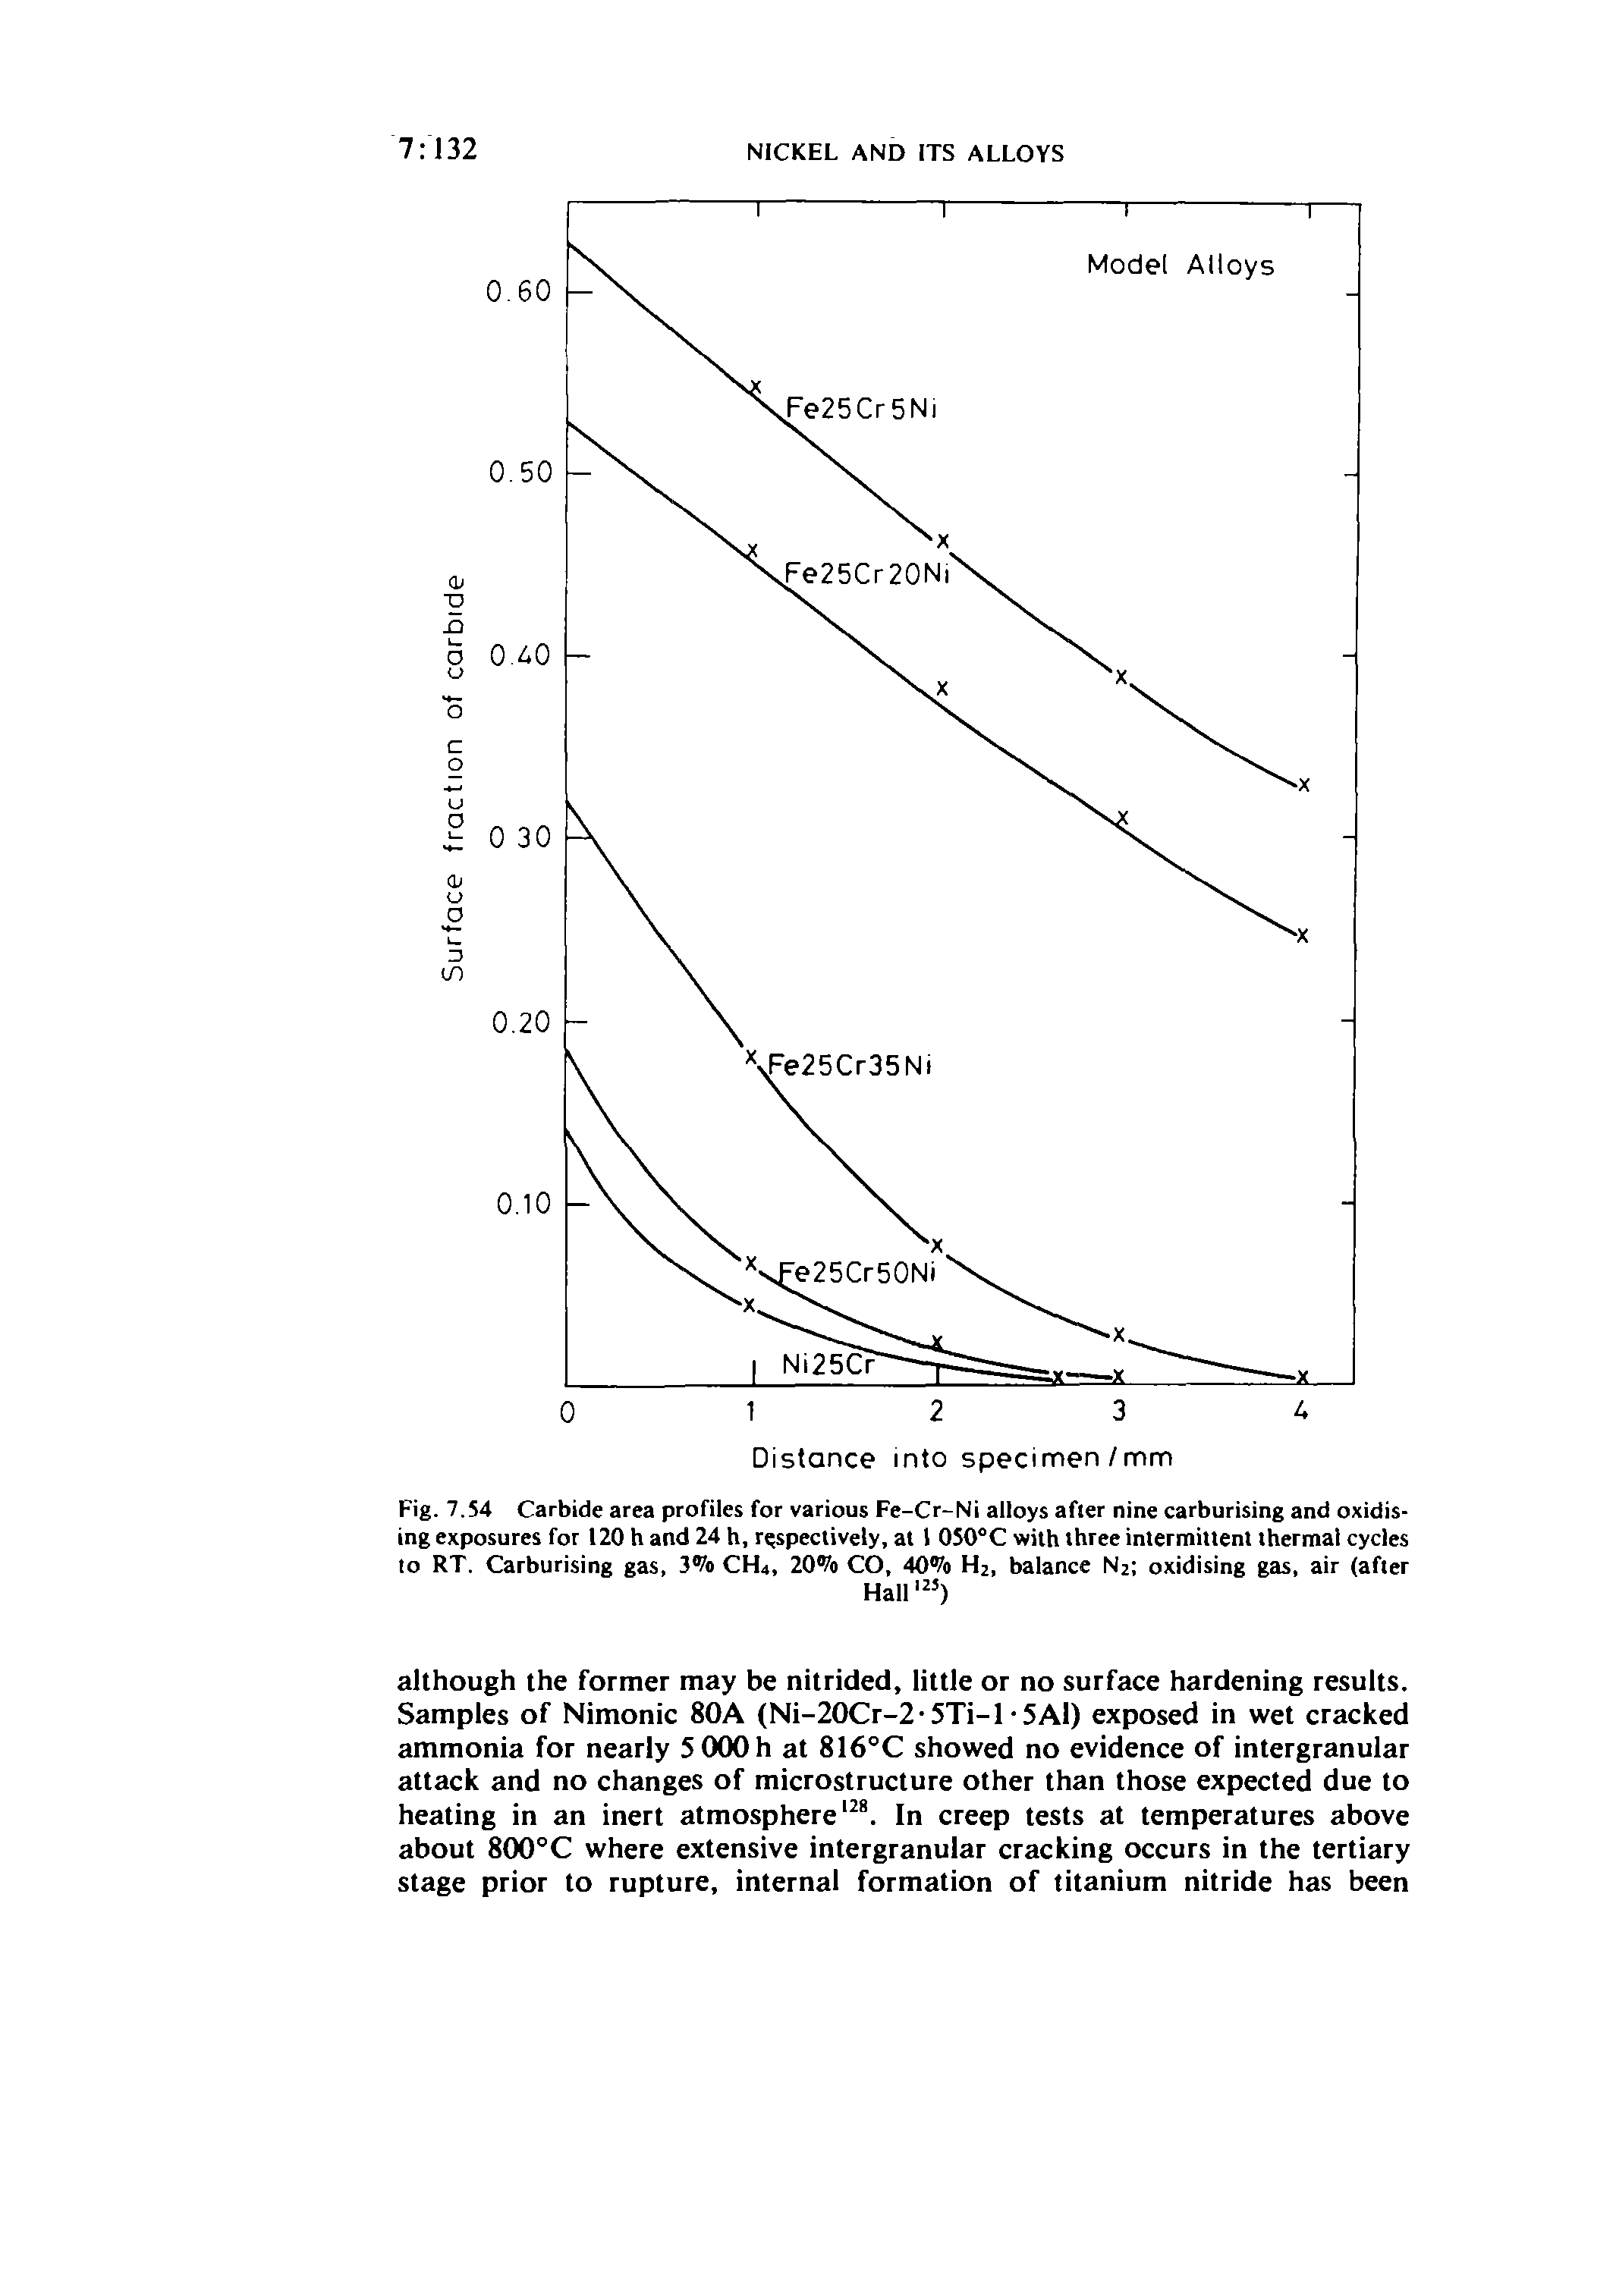 Fig. 7.54 Carbide area profiles for various Fe-Cr-Ni alloys after nine carburising and oxidising exposures for 120 h and 24 h, respectively, at 1 050°C with three intermittent thermal cycles to RT. Carburising gas, 3% CH4, 20% CO, 40% H2, balance N2 oxidising gas, air (after...